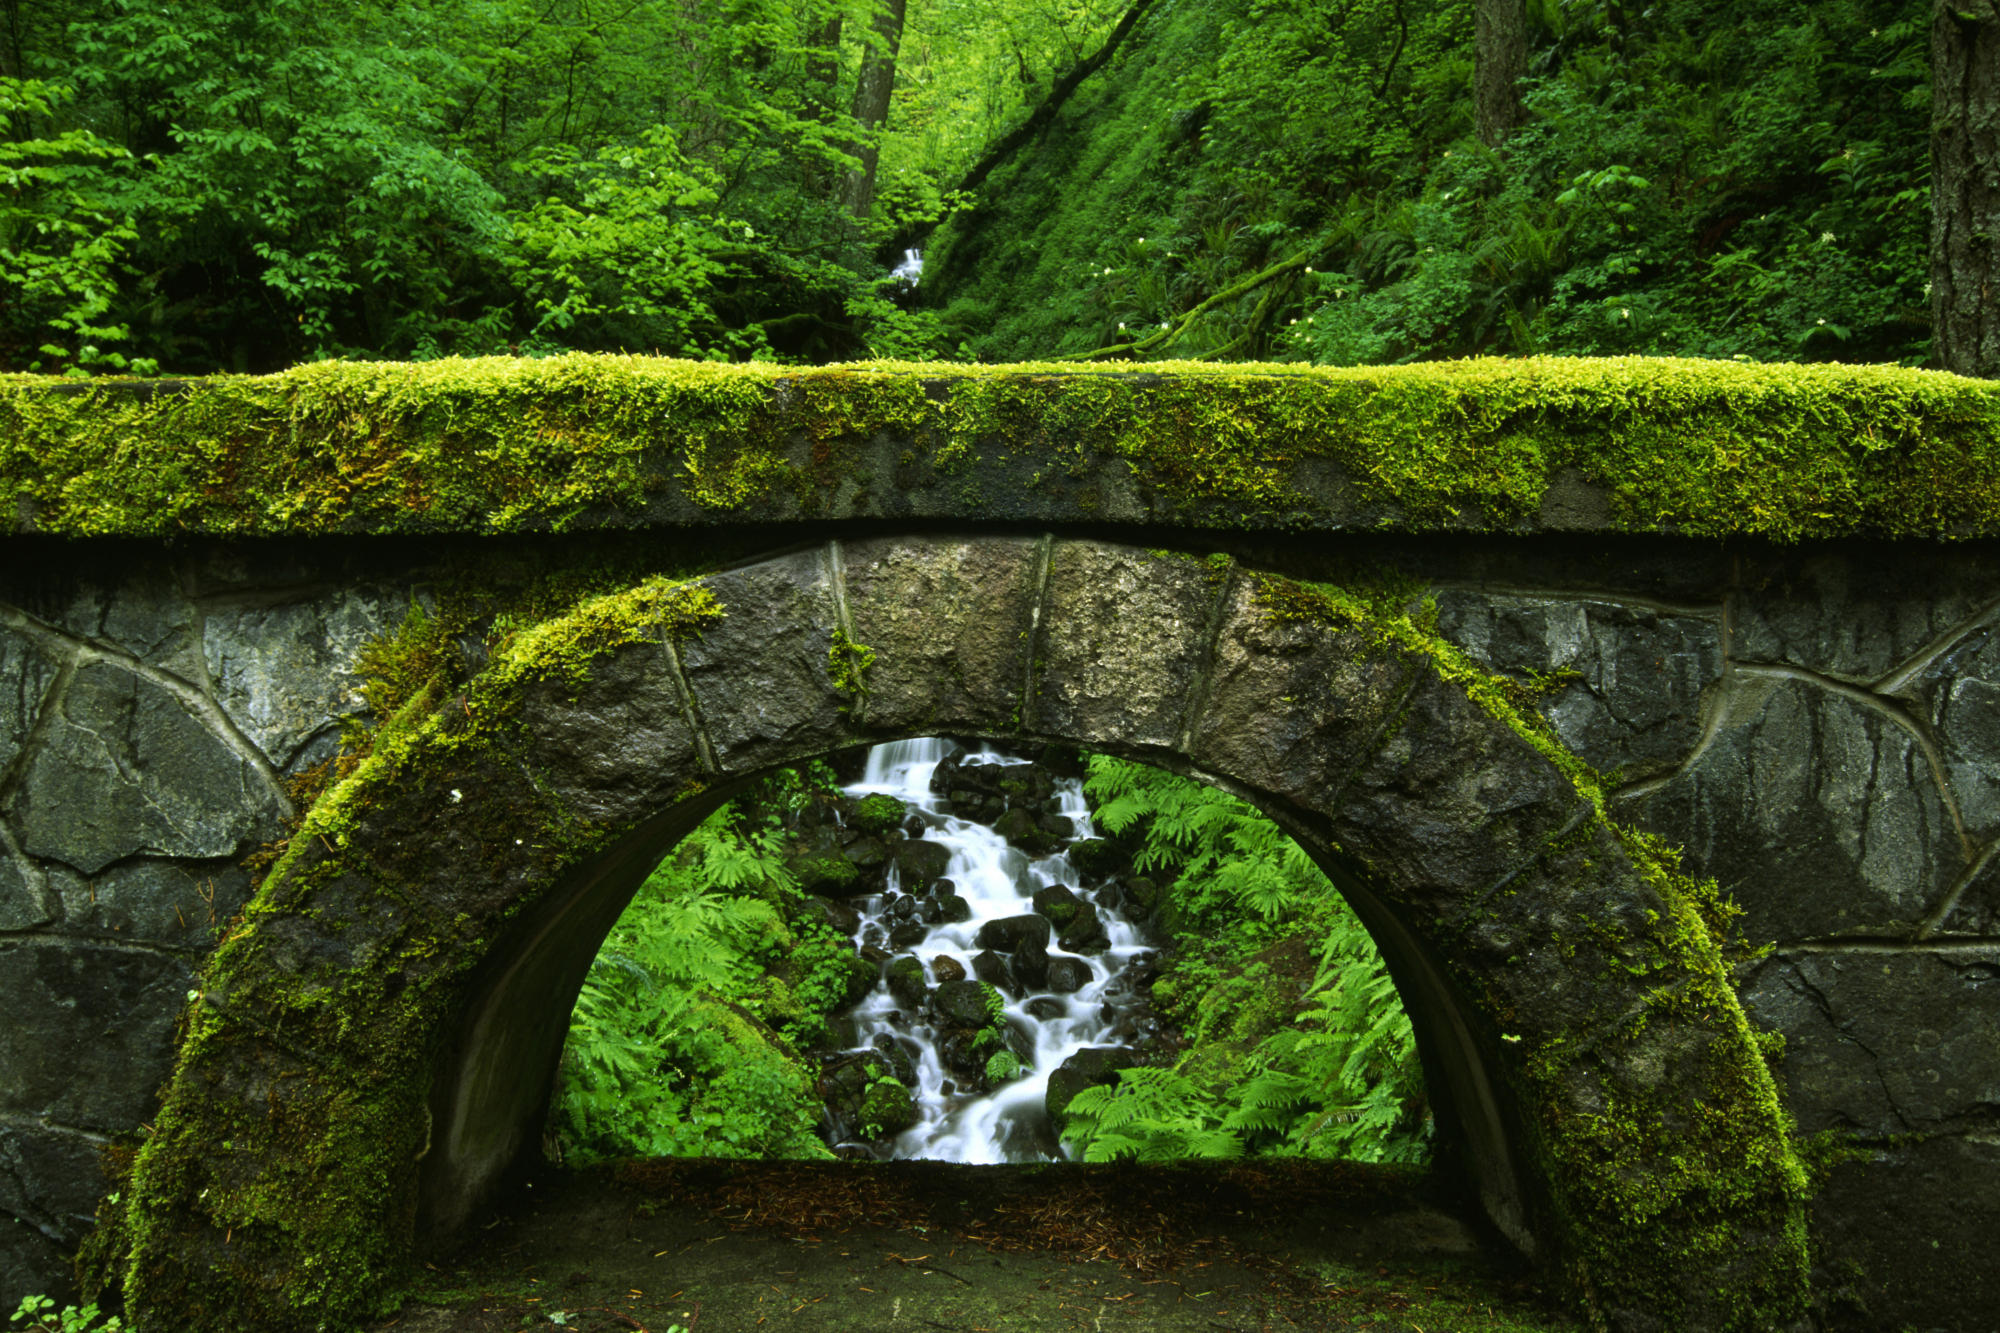 Enchanting moss-covered stone arch surrounded by a lush forest.